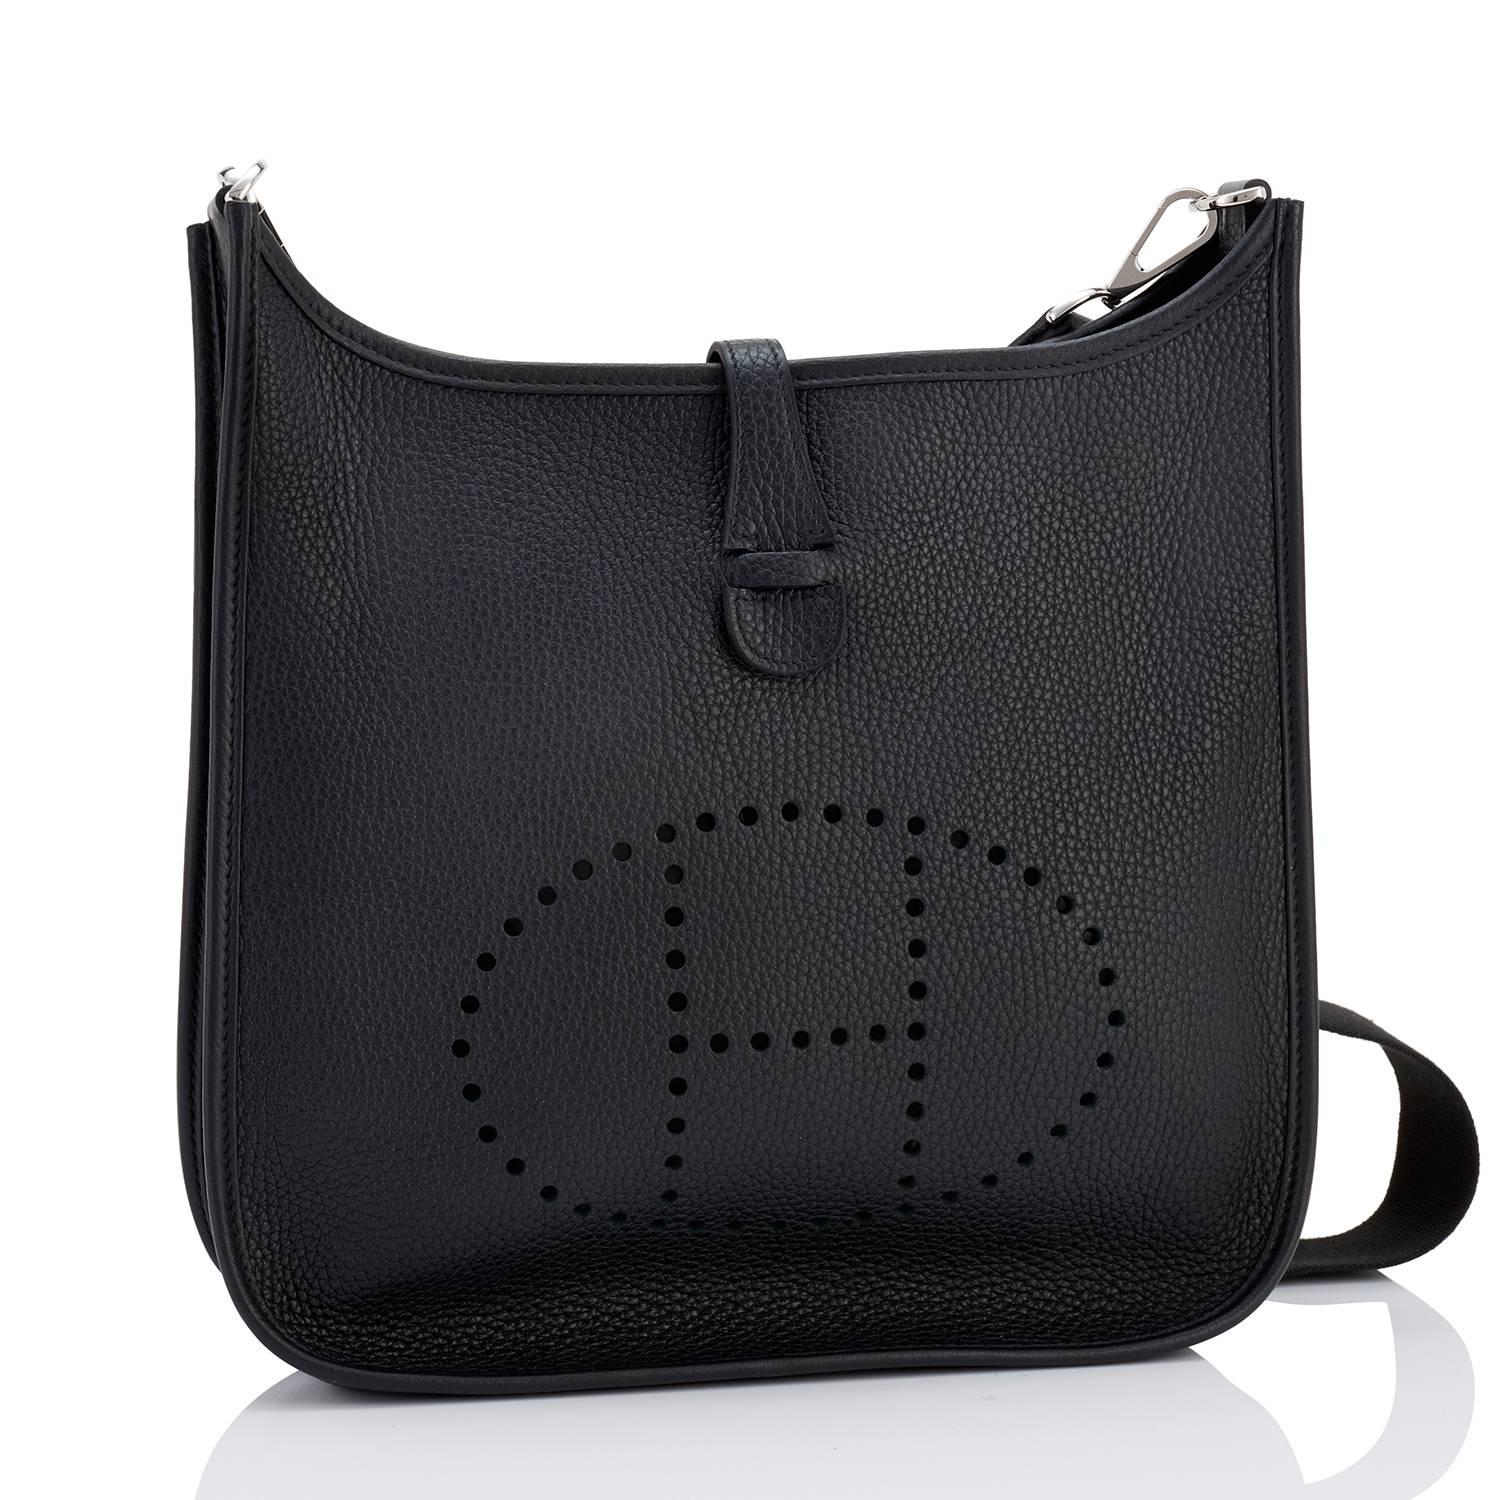 Hermes Black Evelyne PM Cross-Body Messenger Bag Chic NEW GIFT
Just purchased from Hermes store in 2021! Brand New in Box. Store Fresh. Pristine condition.
Perfect gift! Comes with with shoulder strap, sleeper for bag and signature orange Hermes box